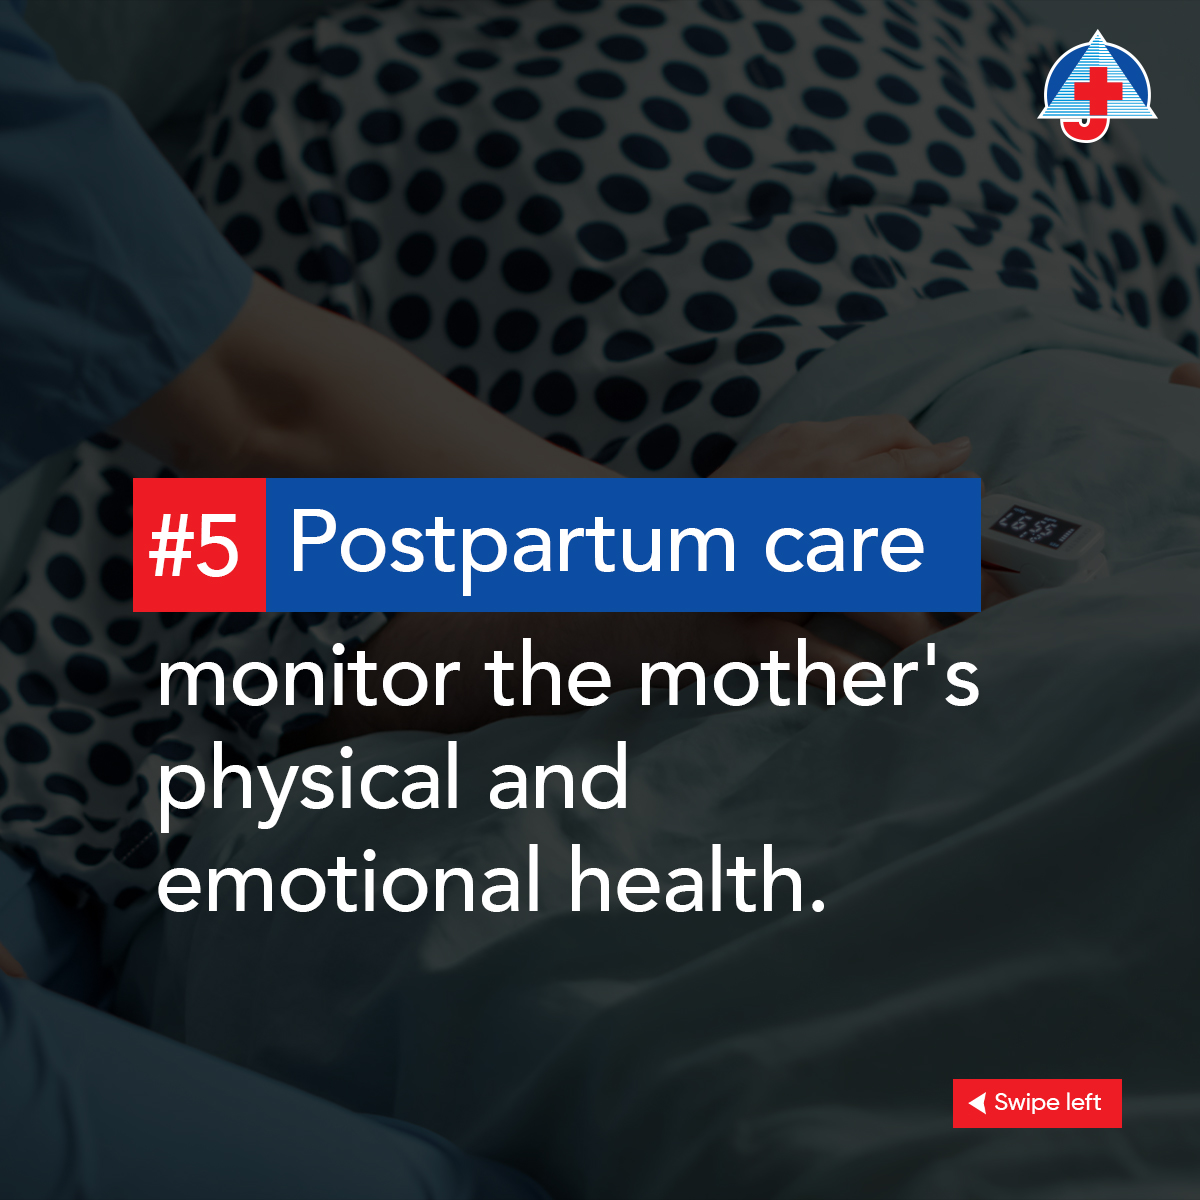 Postpartum care is essential to monitor the physical and emotional well-being of new moms. From regular check-ins to support networks, we're here to ensure every mom feels nurtured, empowered, and cared for during this transformative chapter.
#postpartumcare #emotionalhealth